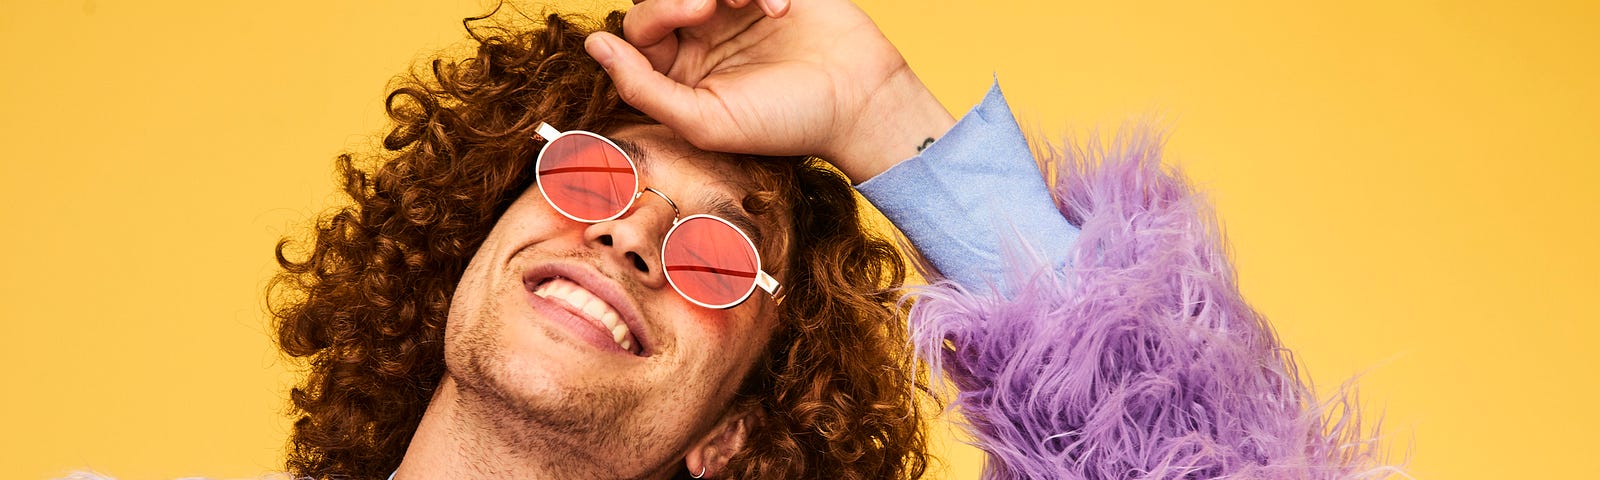 A photo of a joyful man with curly brown hair wearing a lavender furry jacket in front of a yellow background.